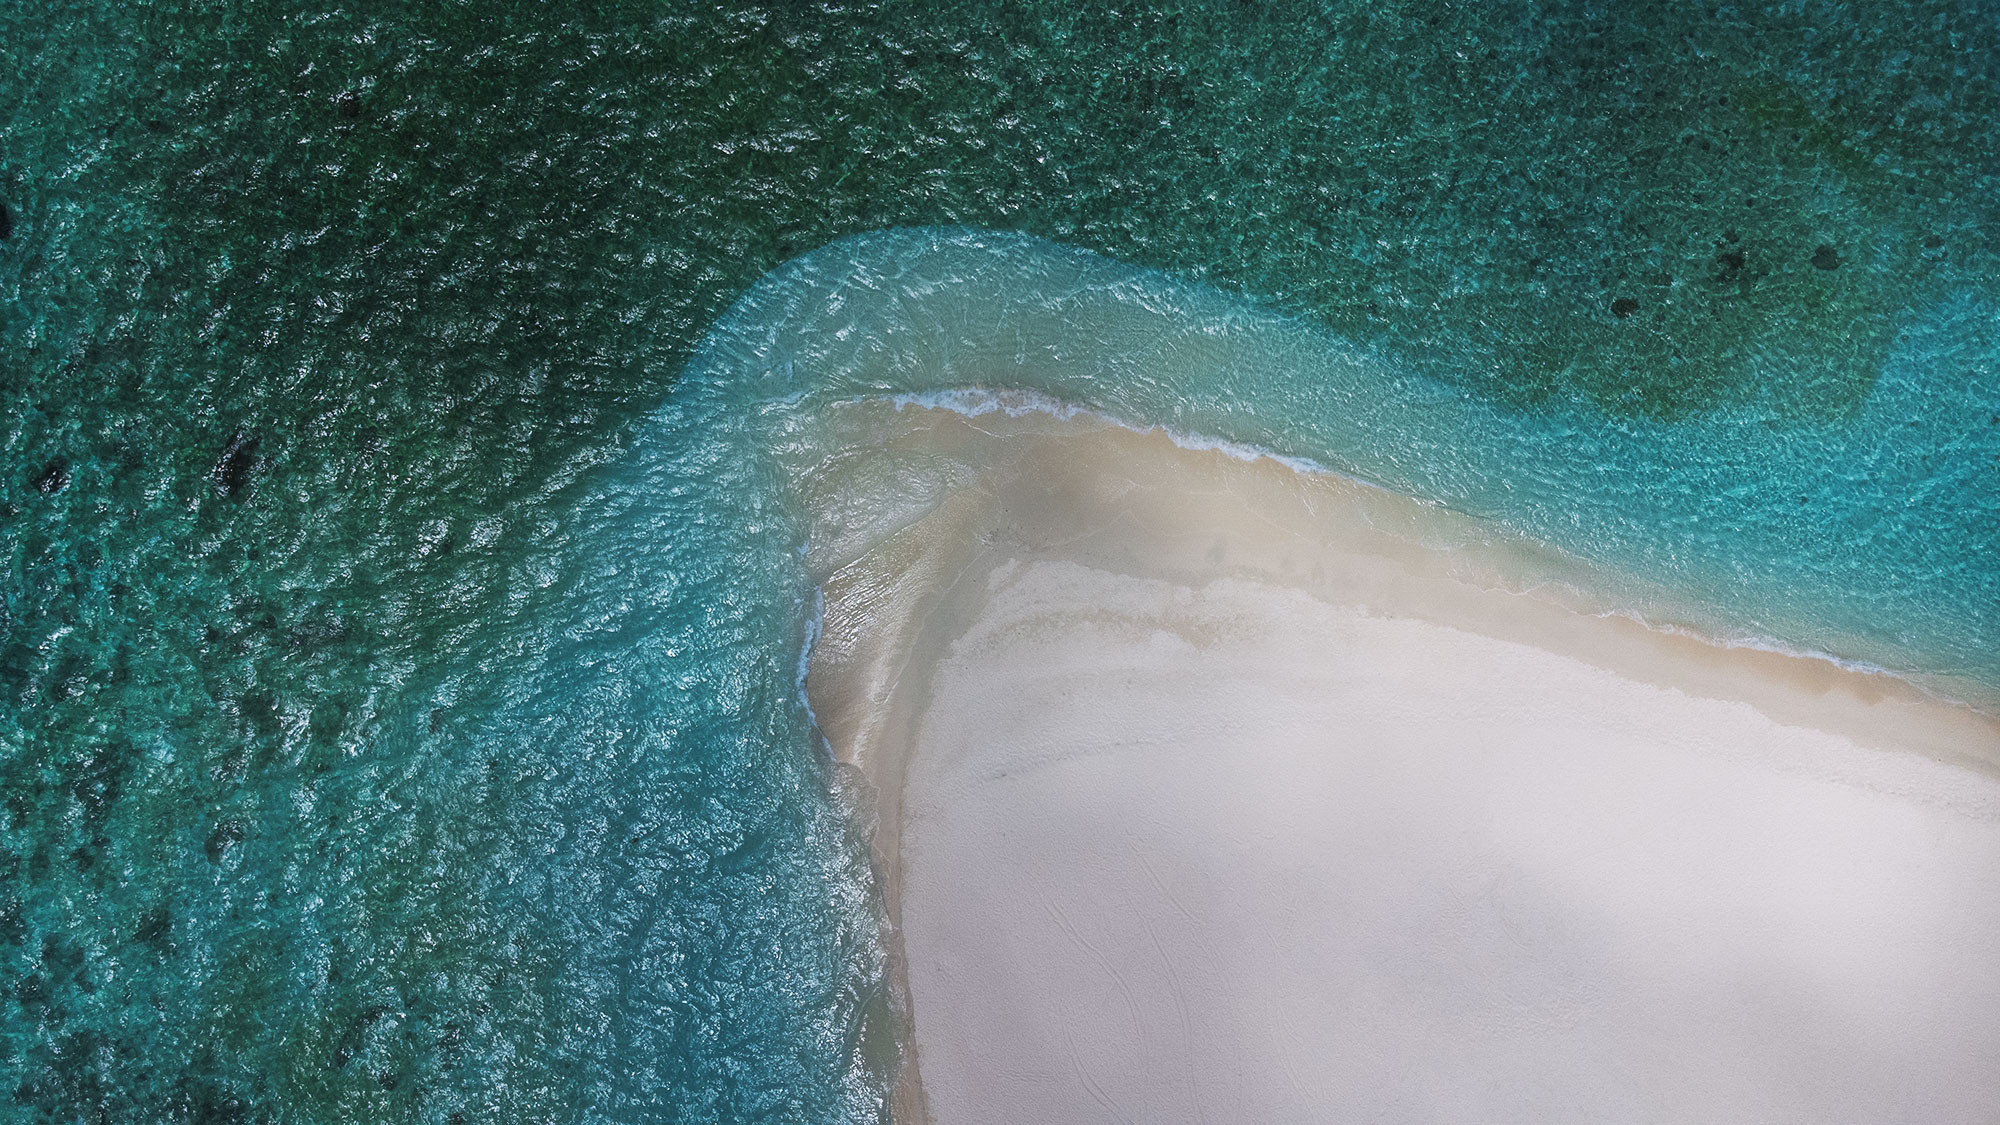 Aerial drone landscape photography showcasing the pristine beach and crystal-clear waters of Thudufushi Island in the Maldives. The turquoise sea meets the white sandy shore, creating a mesmerizing view of tropical paradise from above.